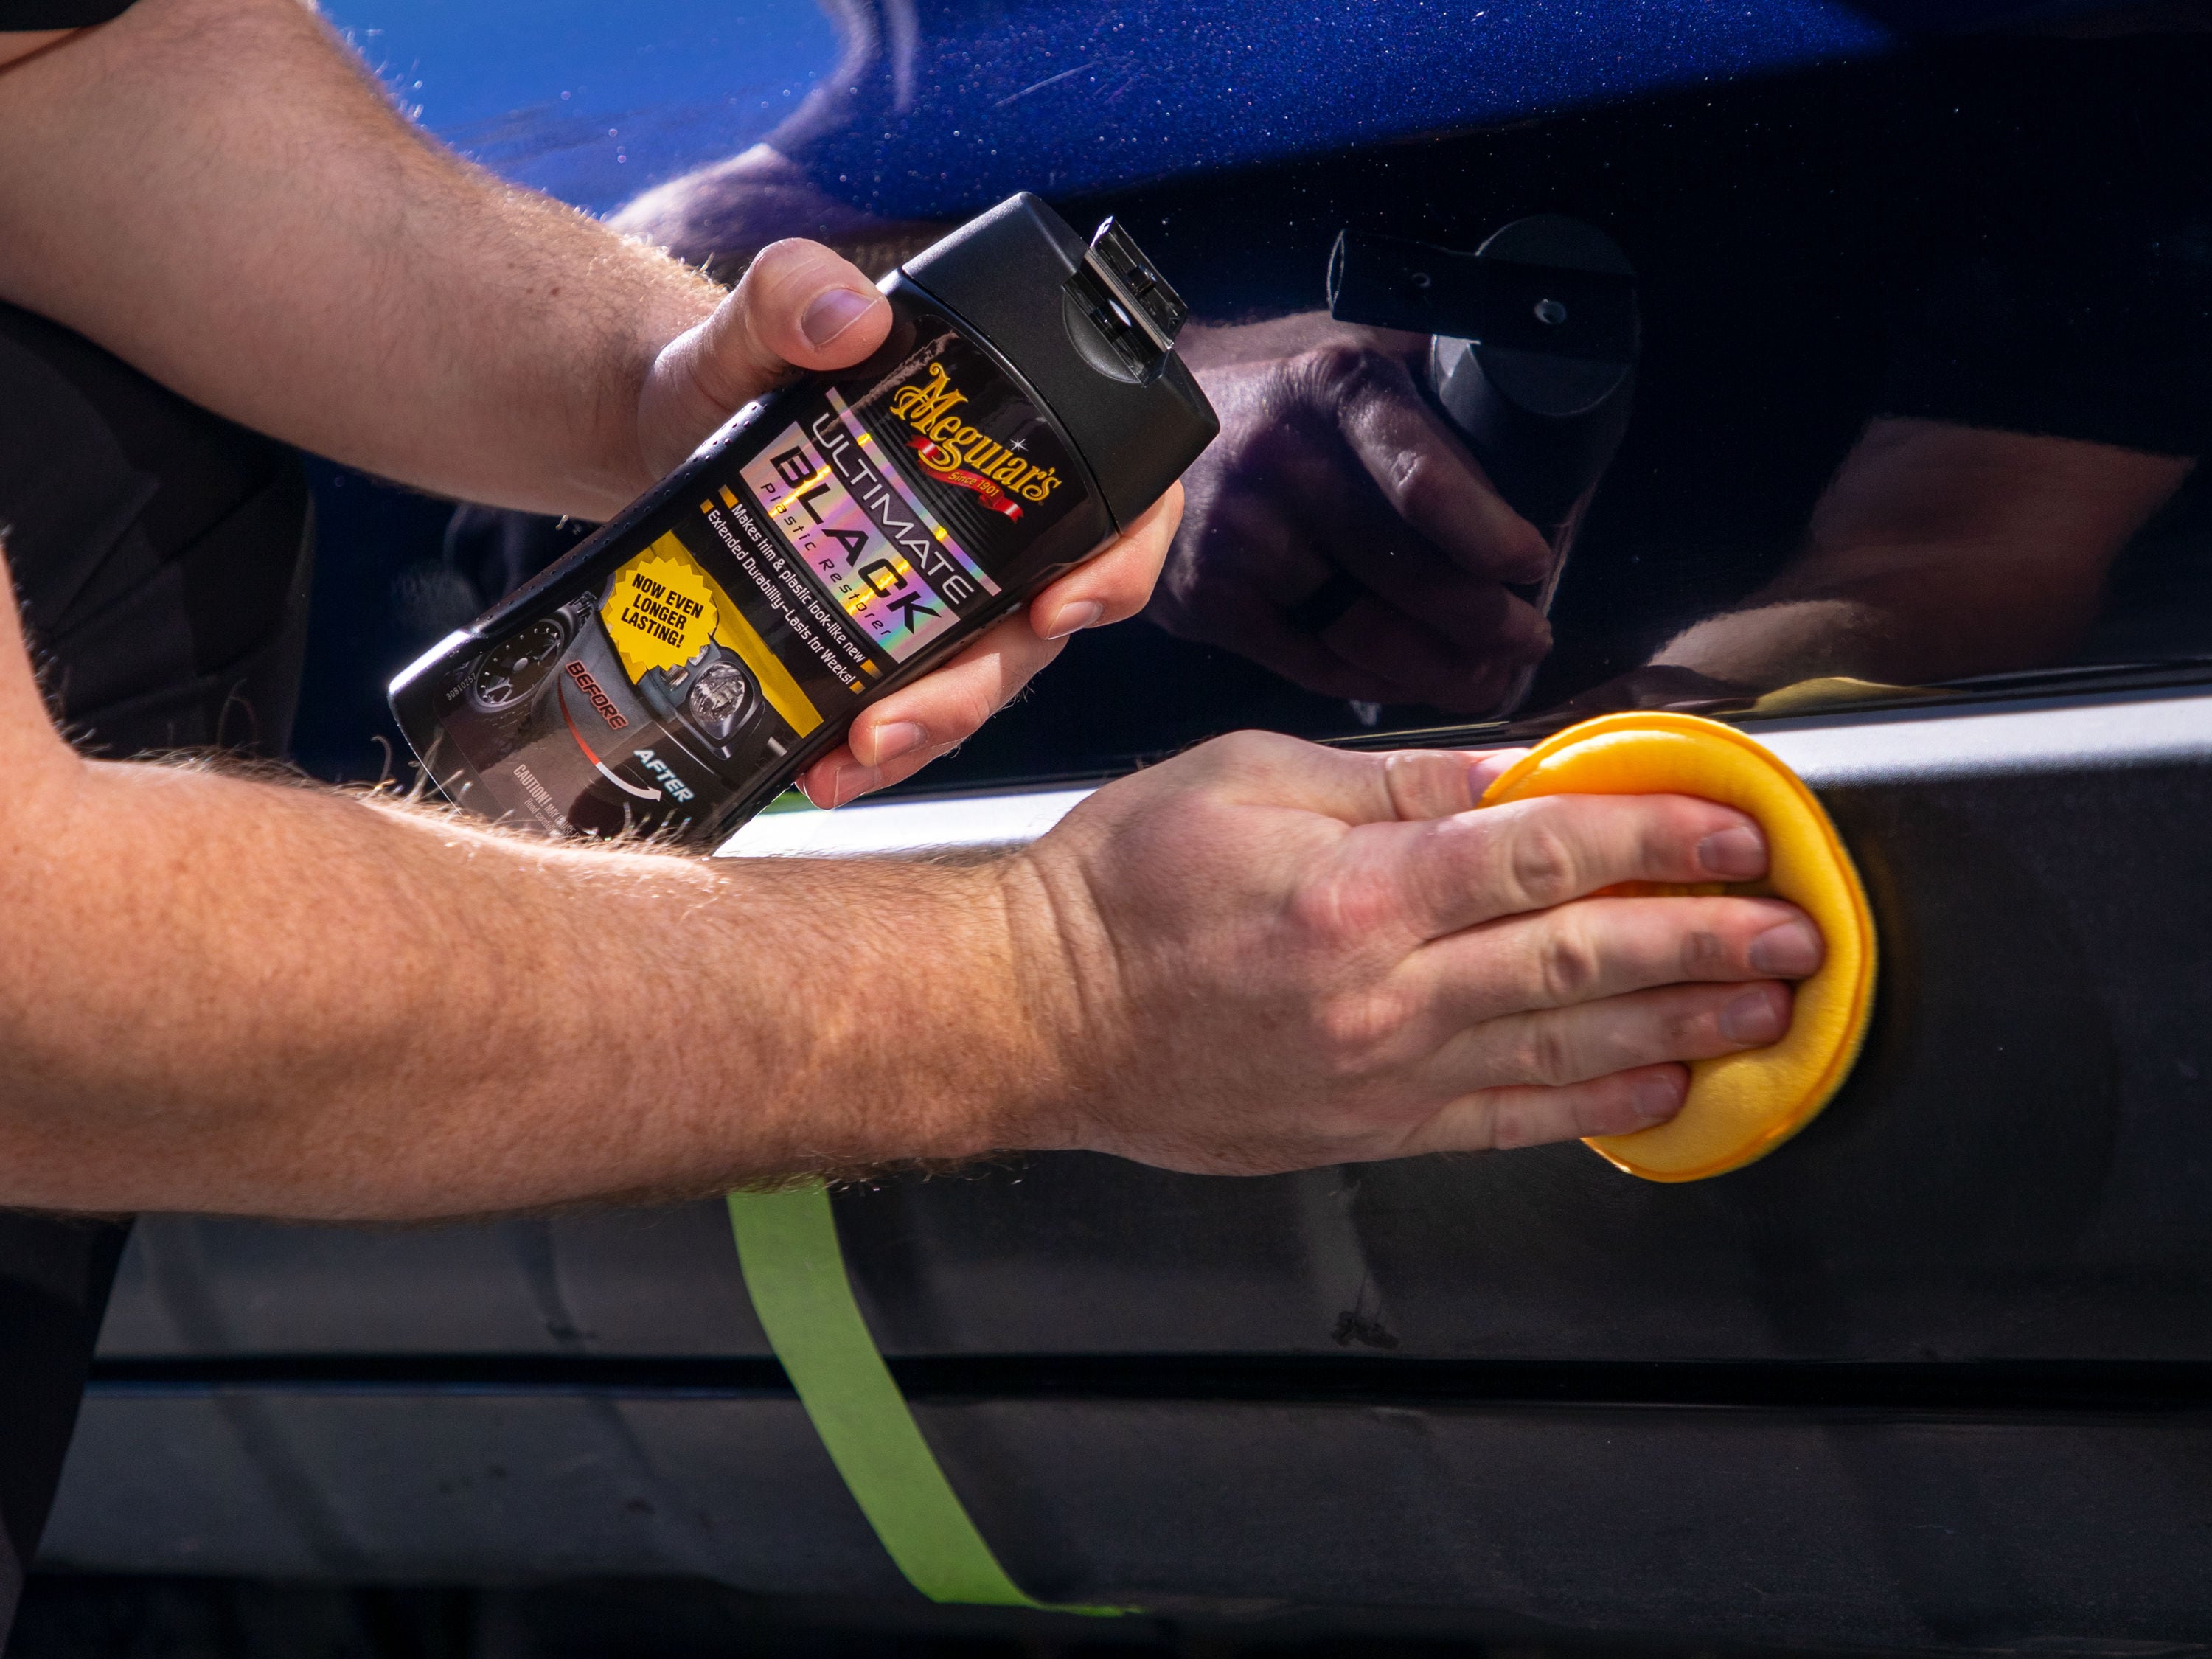 Meguiar's 25-Count Car Exterior Restoration Kit in the Car Exterior  Cleaners department at